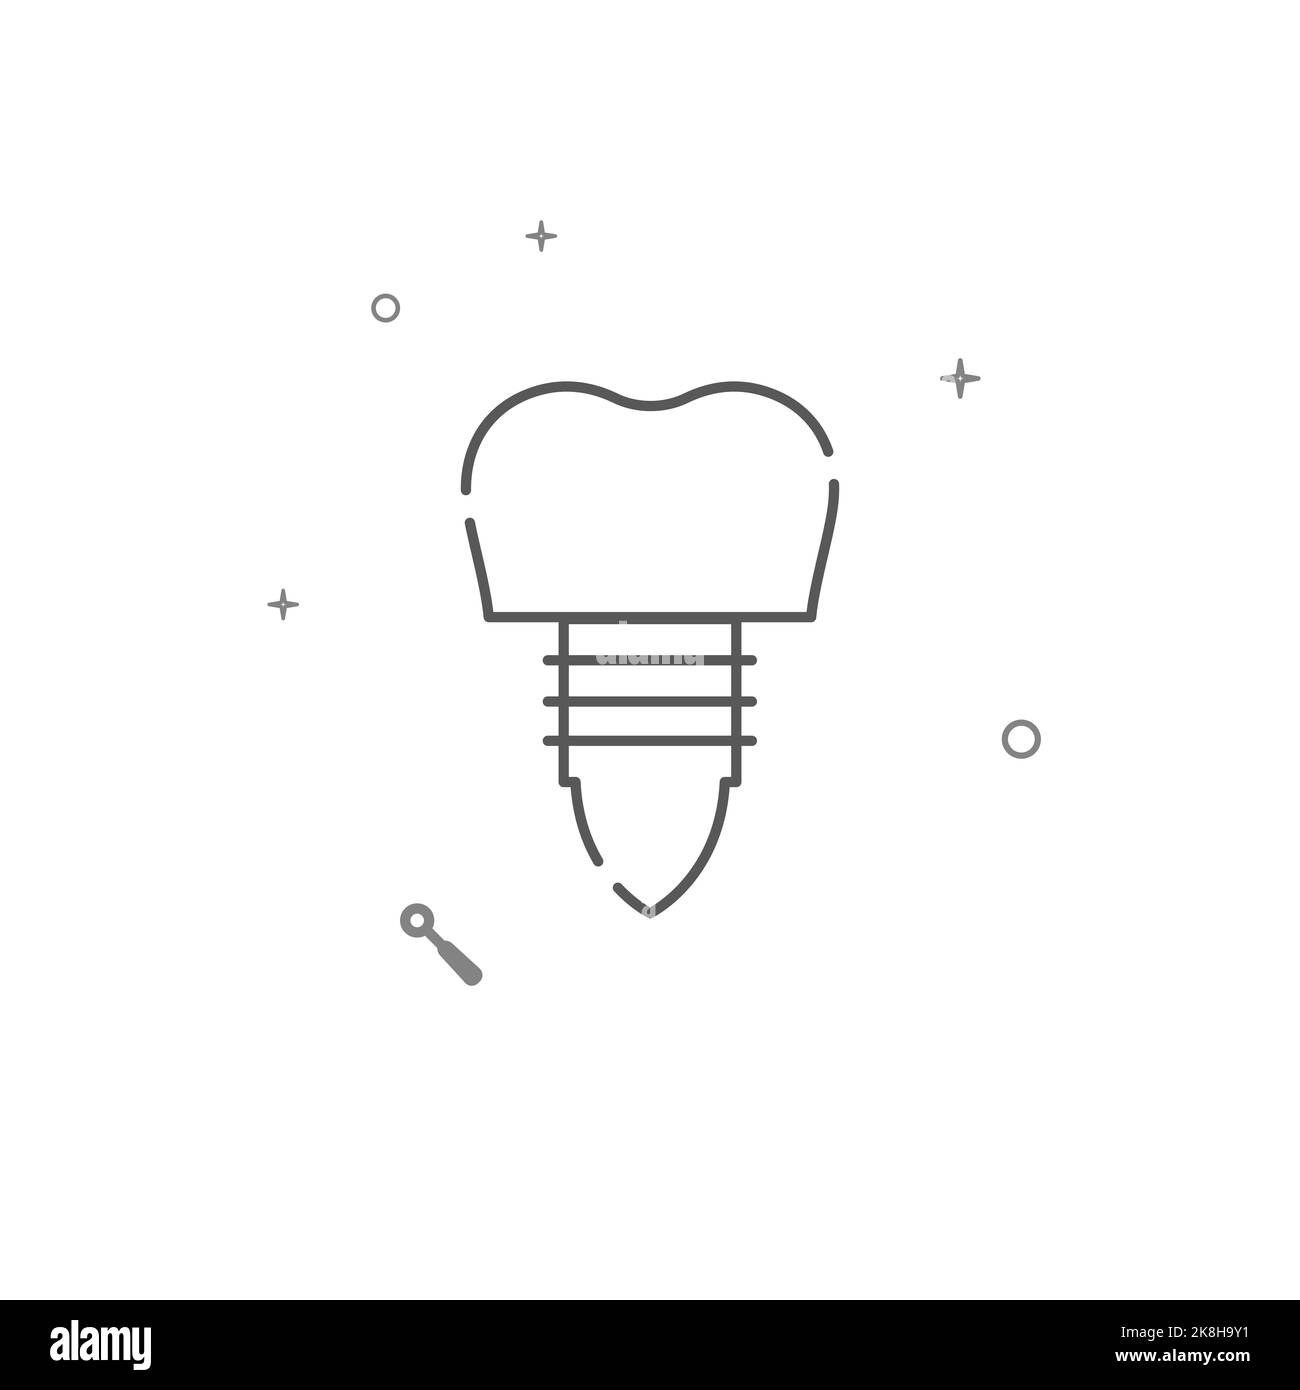 Dental prosthesis on a pin, tooth implant simple line icon. Symbol, pictogram, sign isolated on white background. Stock Photo